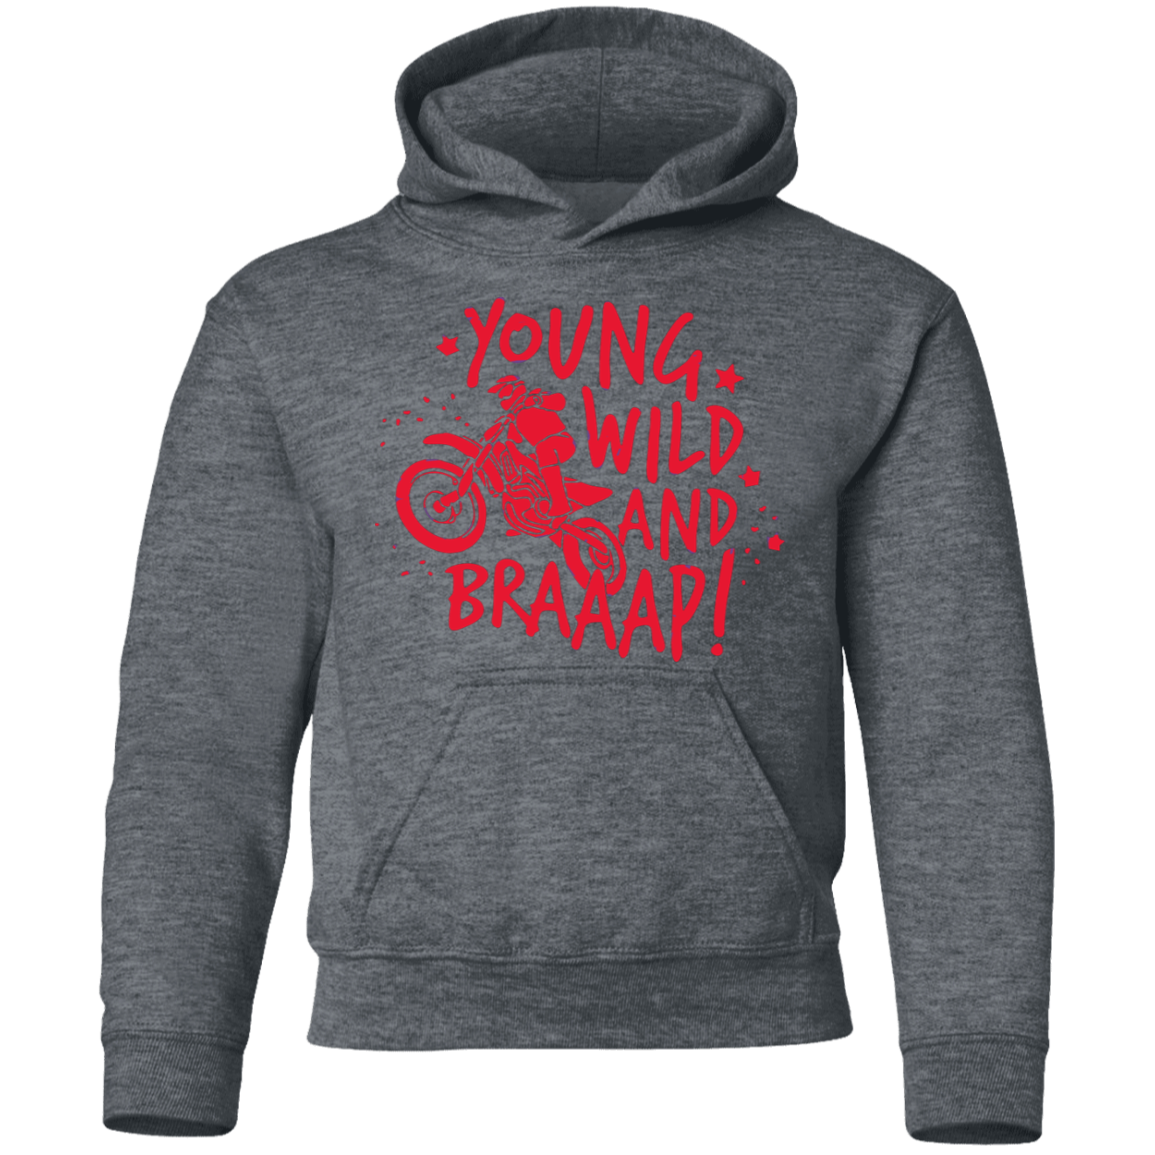 Youth young and wild motorcycle hoodie